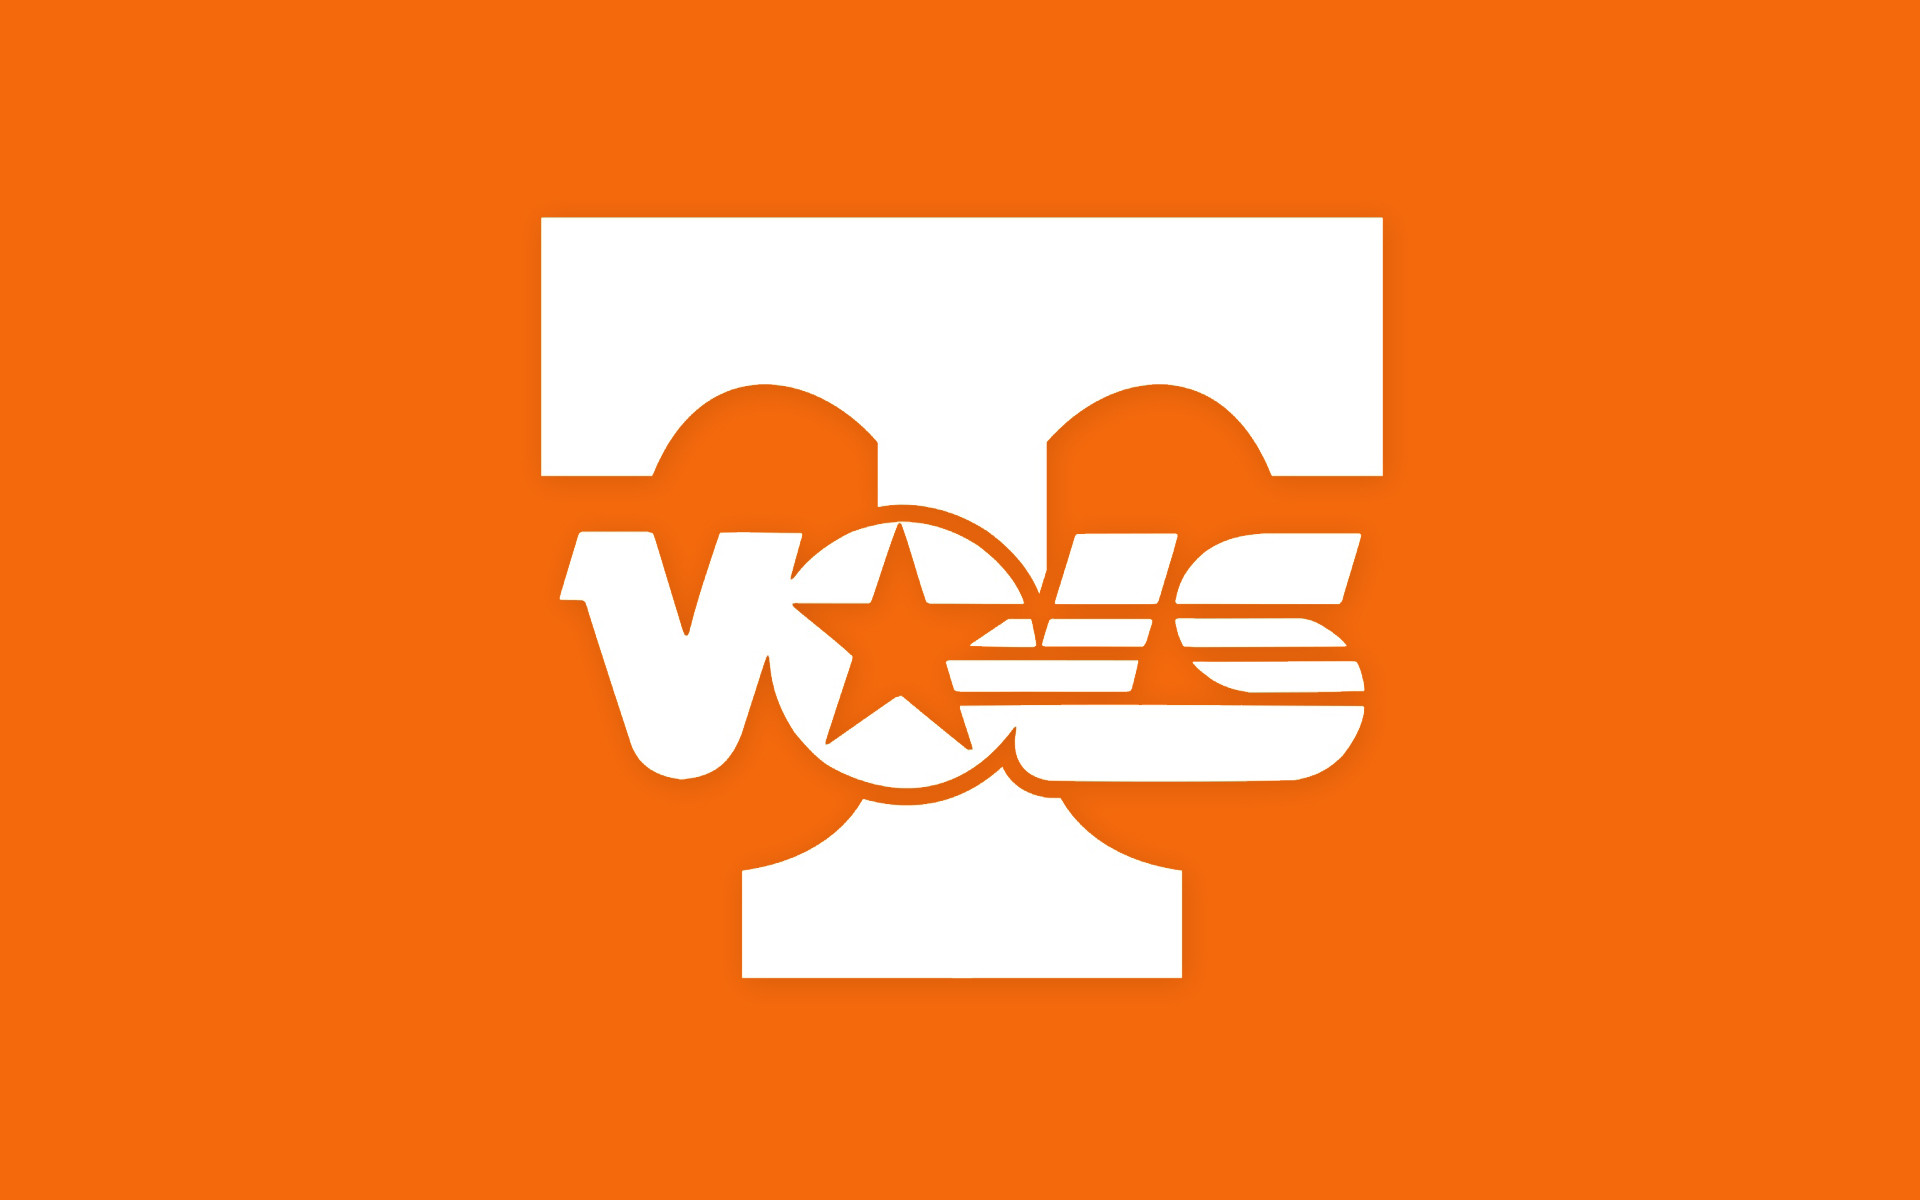 1920x1200 University Of Tennessee Logo Stencil University of Tennessee 